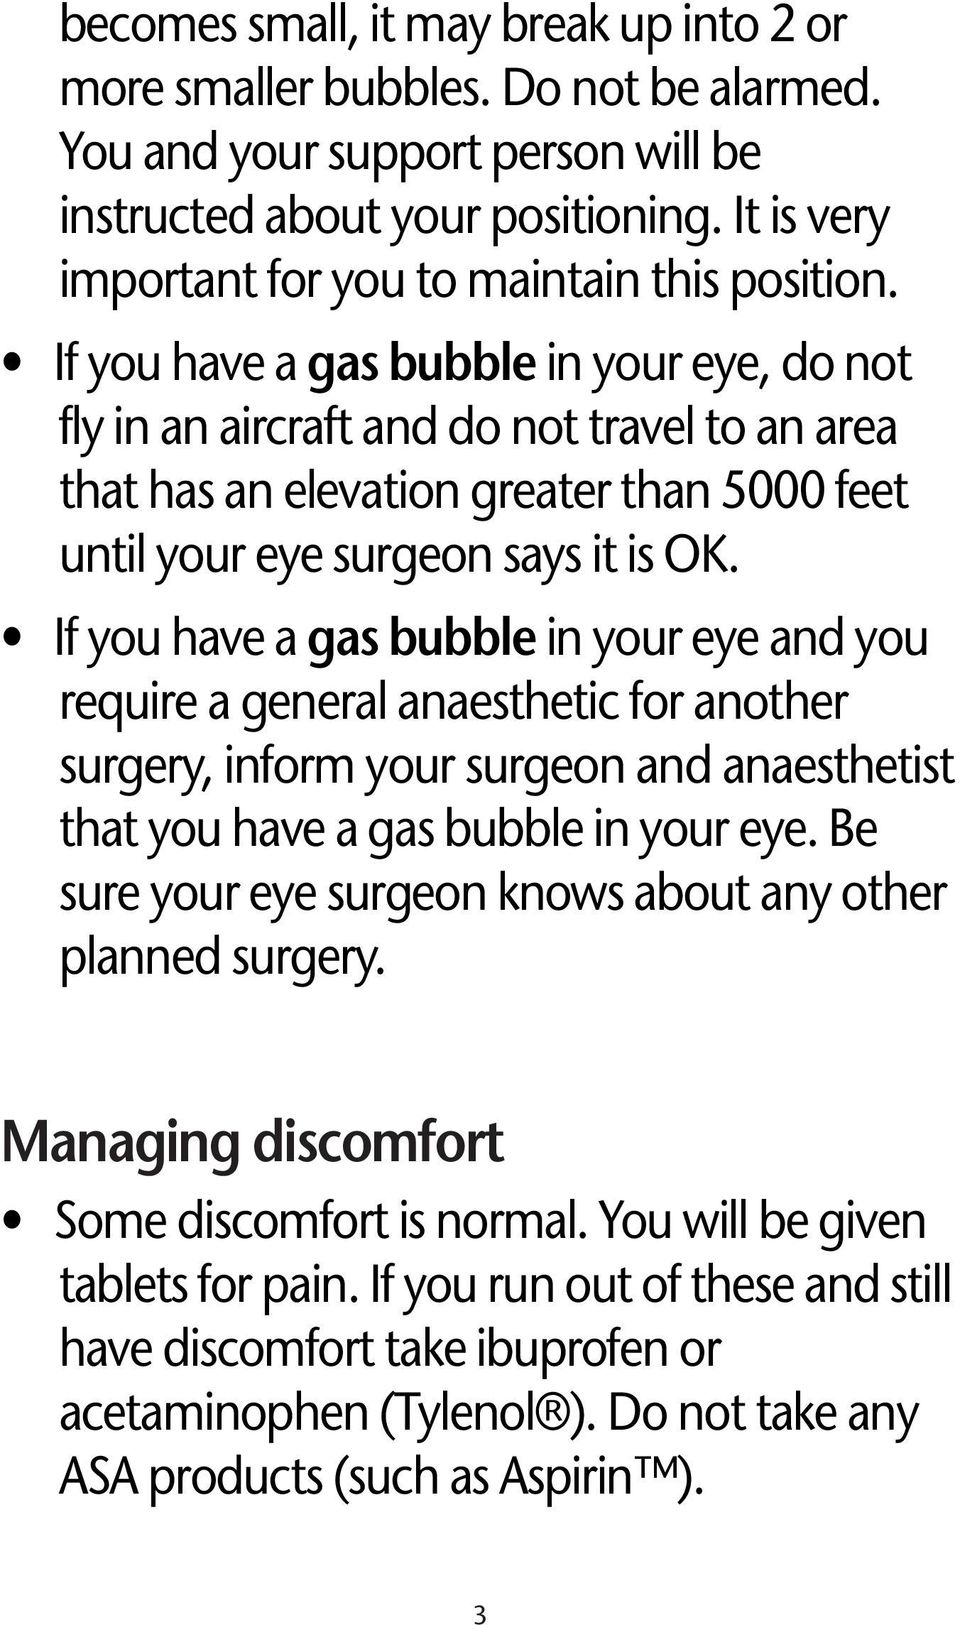 If you have a gas bubble in your eye, do not fly in an aircraft and do not travel to an area that has an elevation greater than 5000 feet until your eye surgeon says it is OK.